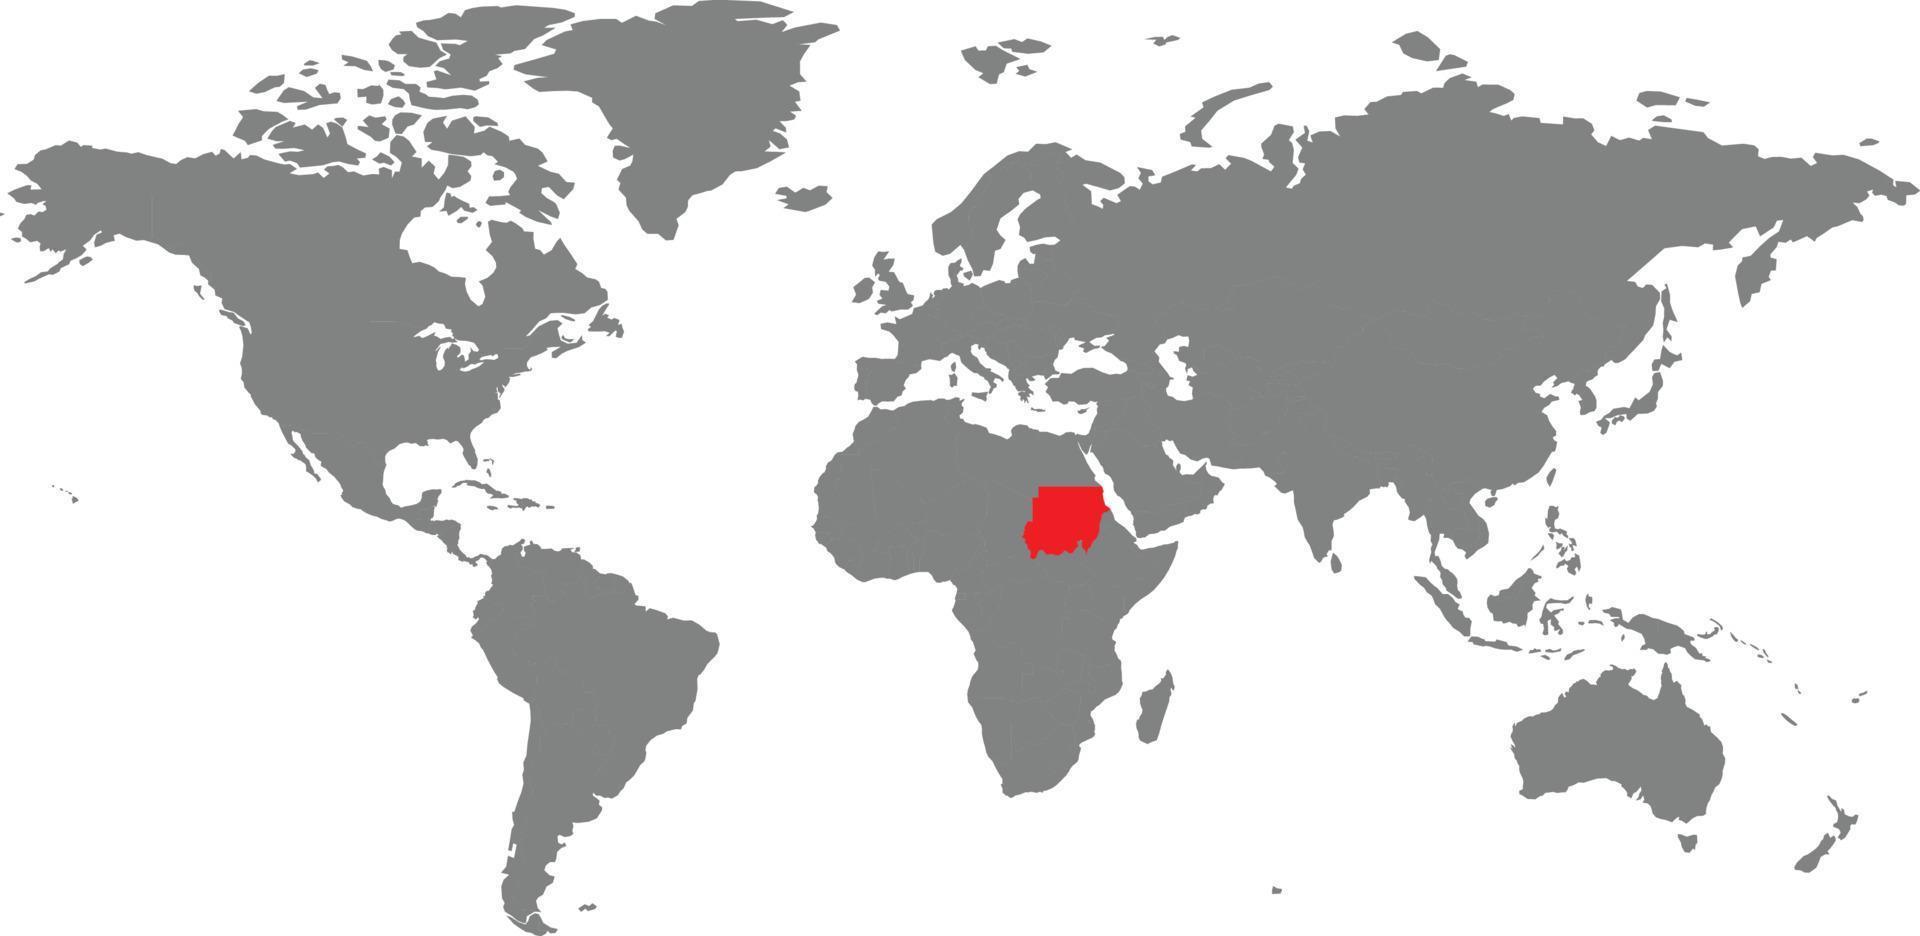 Sudan map on the world map vector